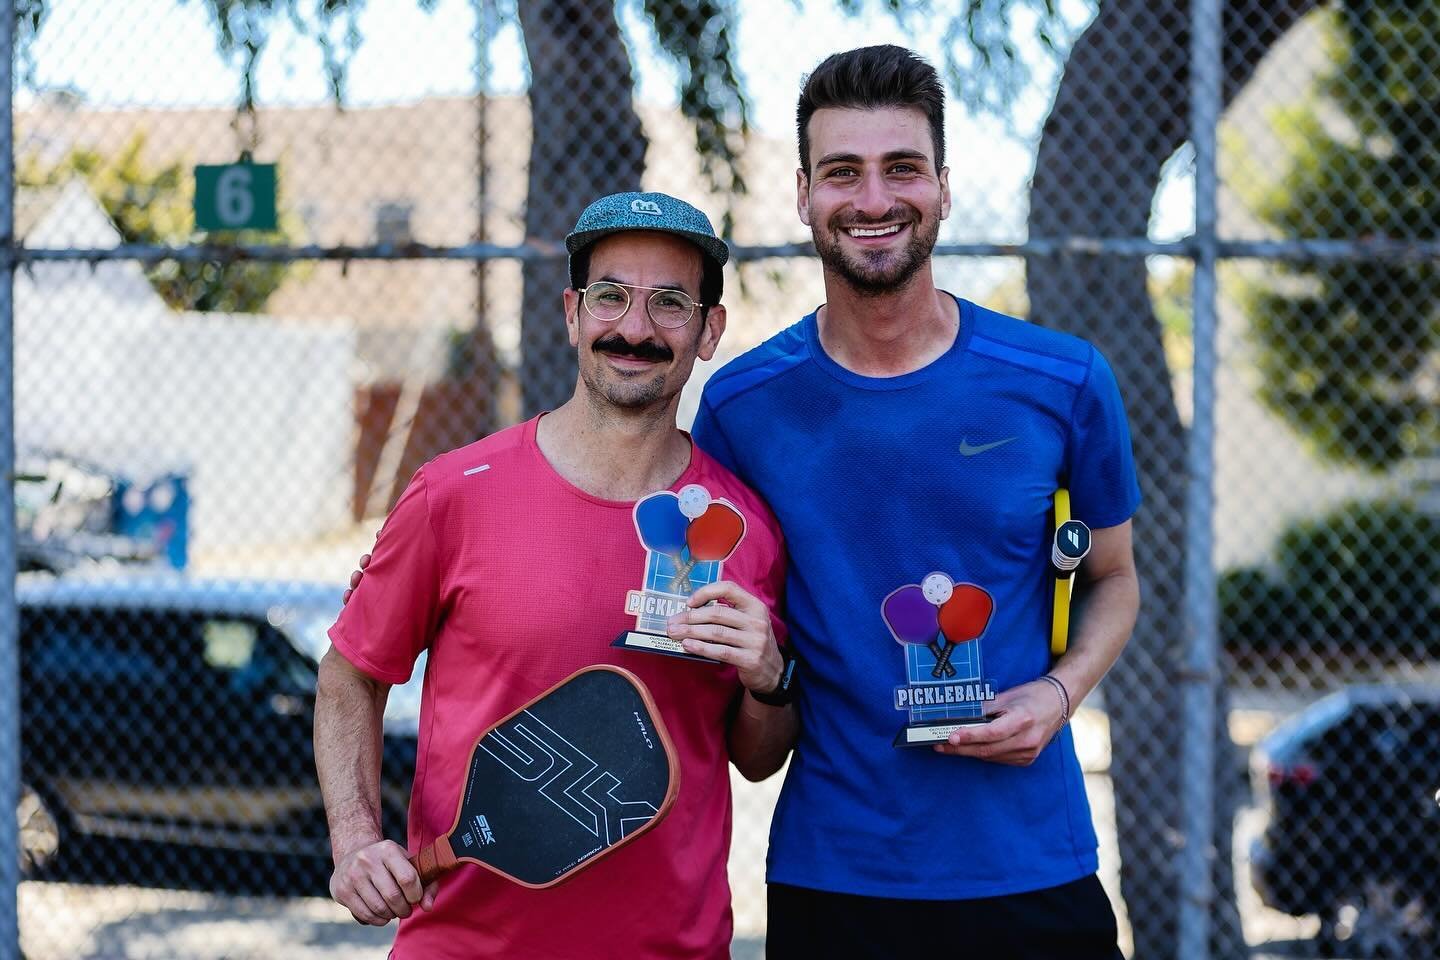 Come one, come all, come pickleball! 
While Monday is completely sold out, you still have until the end of today to register for the Saturday Pickleball League. Hopefully an inside look at the trophies from last season&rsquo;s winners will inspire yo